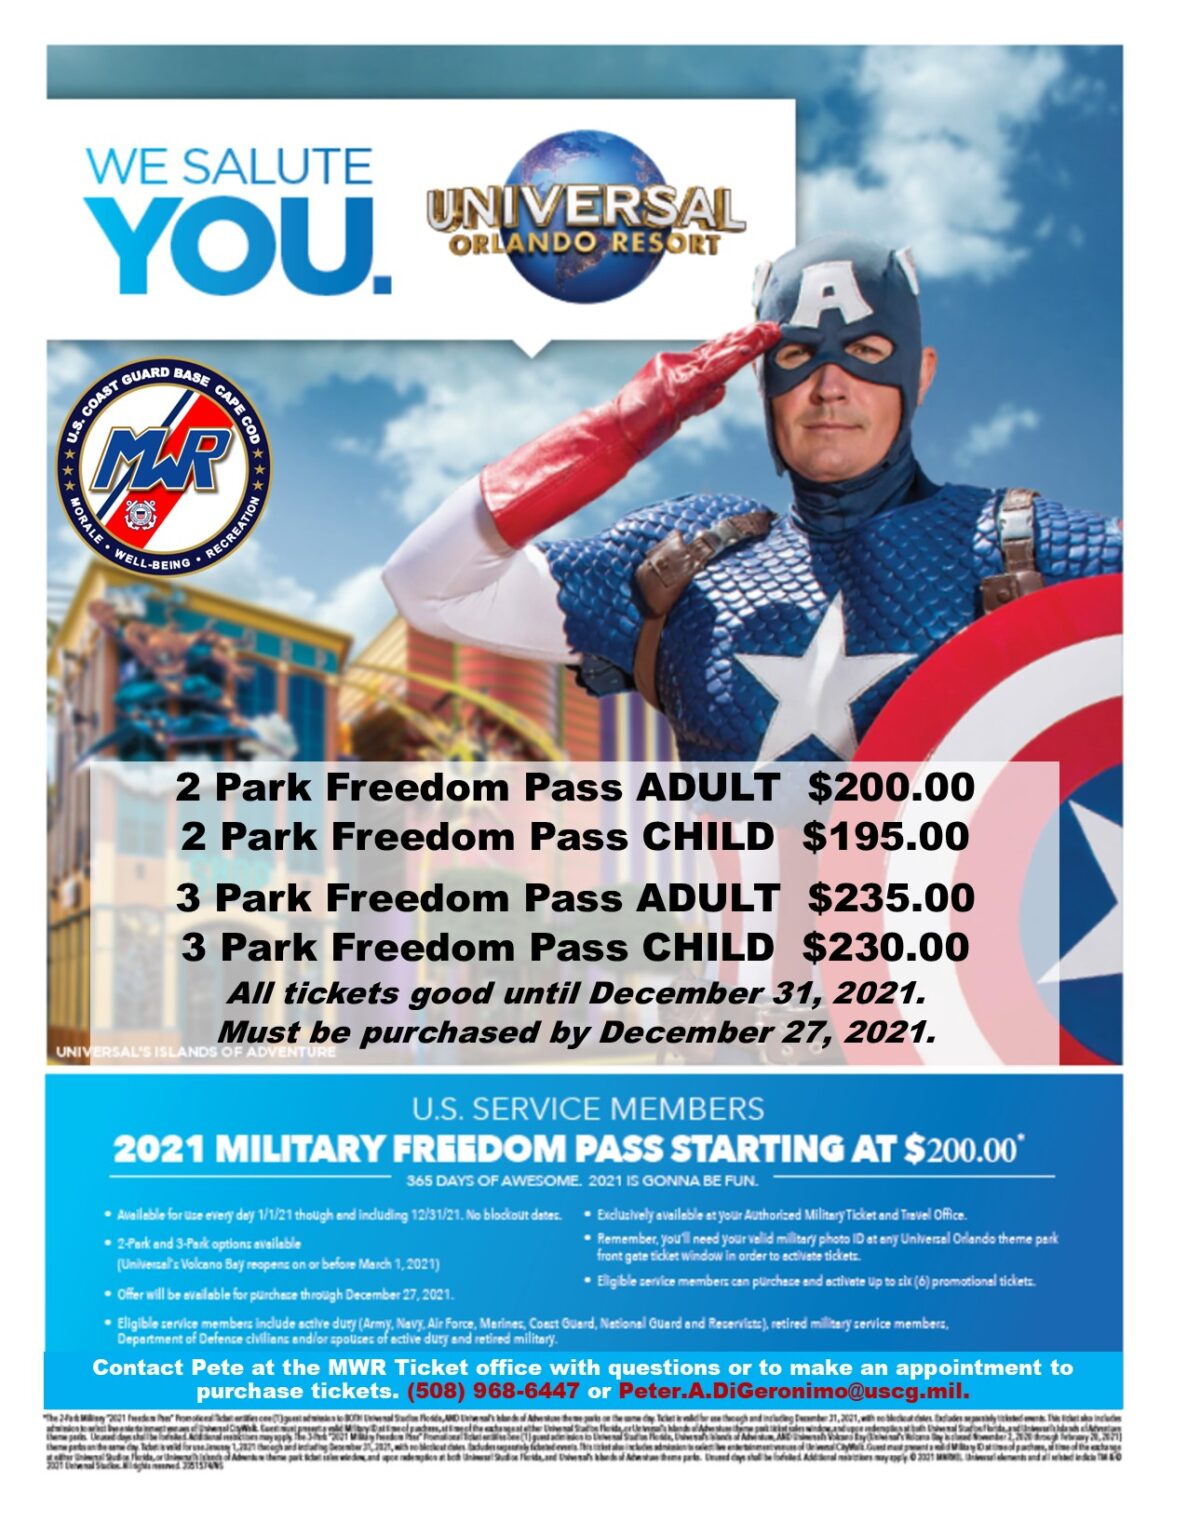 MWR Ticket Office Discounted Disney, Universal, Six Flags tickets, and